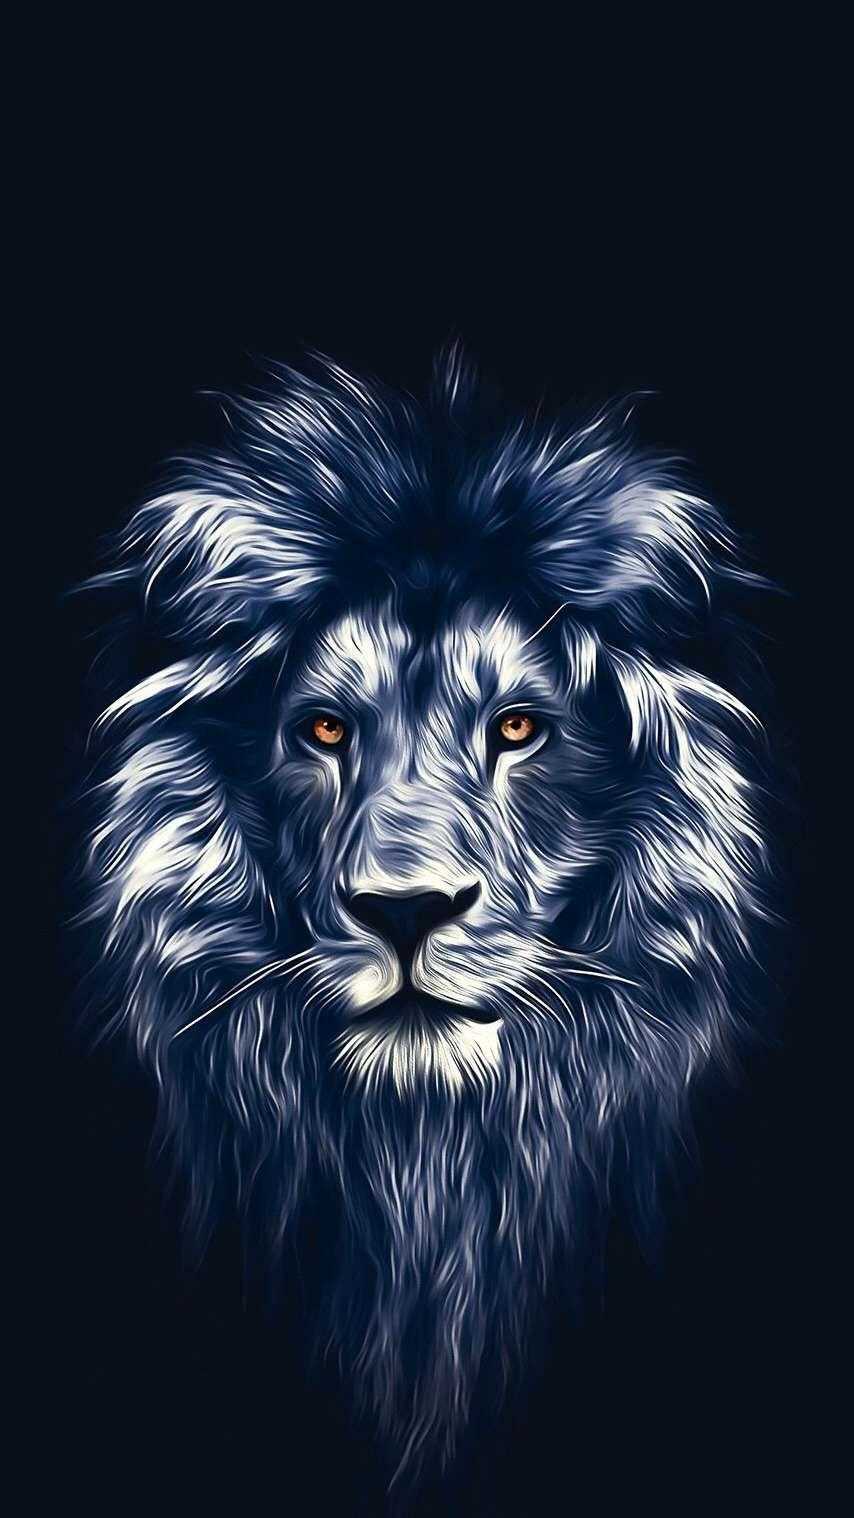 170 Lion HD Wallpapers and Backgrounds